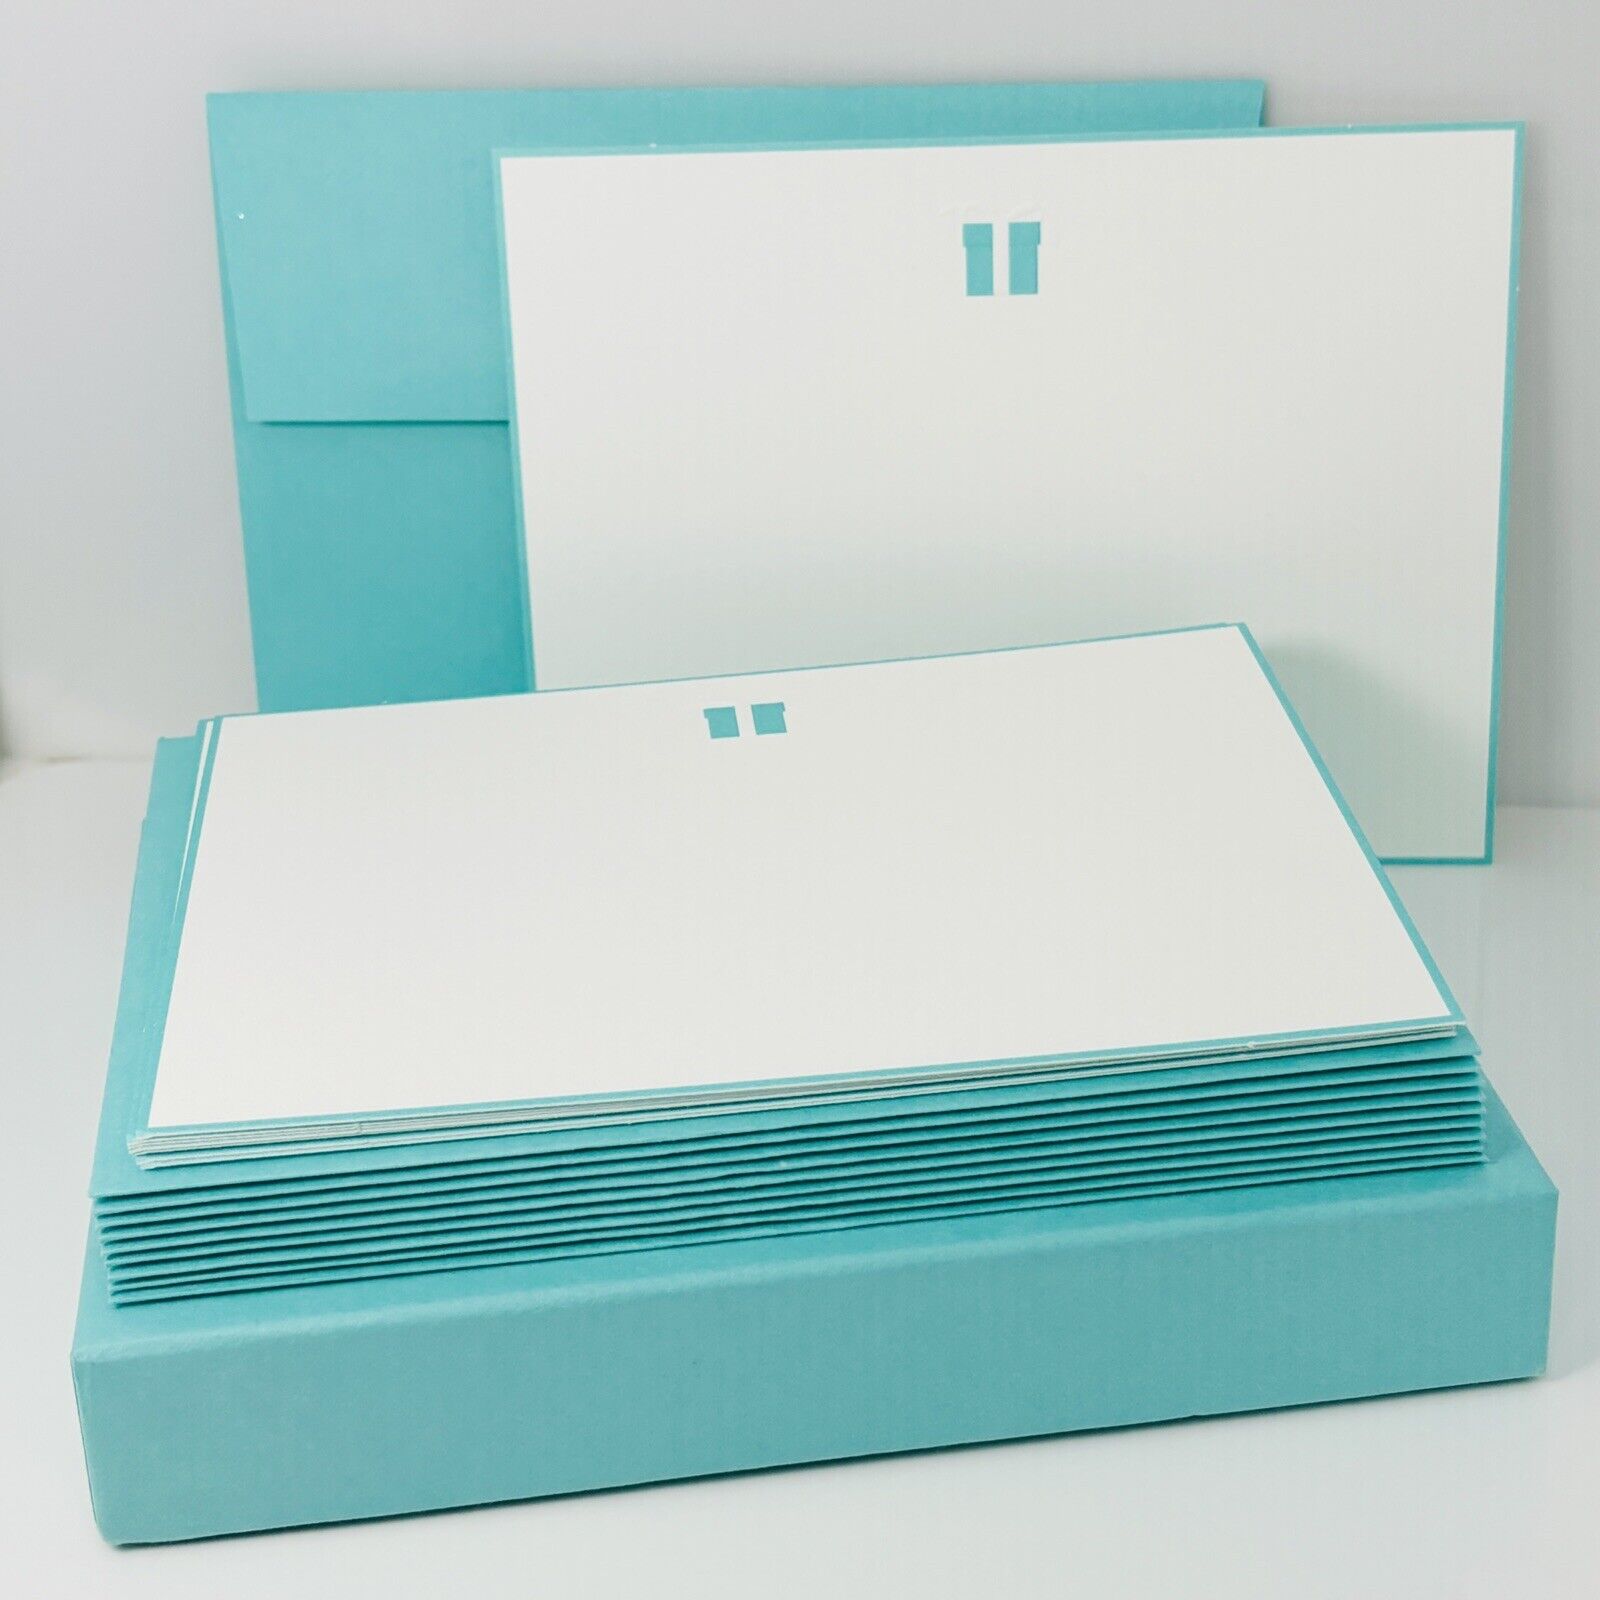 Tiffany & Co Blank Note Cards Greeting Thank You Embossed Blue Gift Box Ribbon